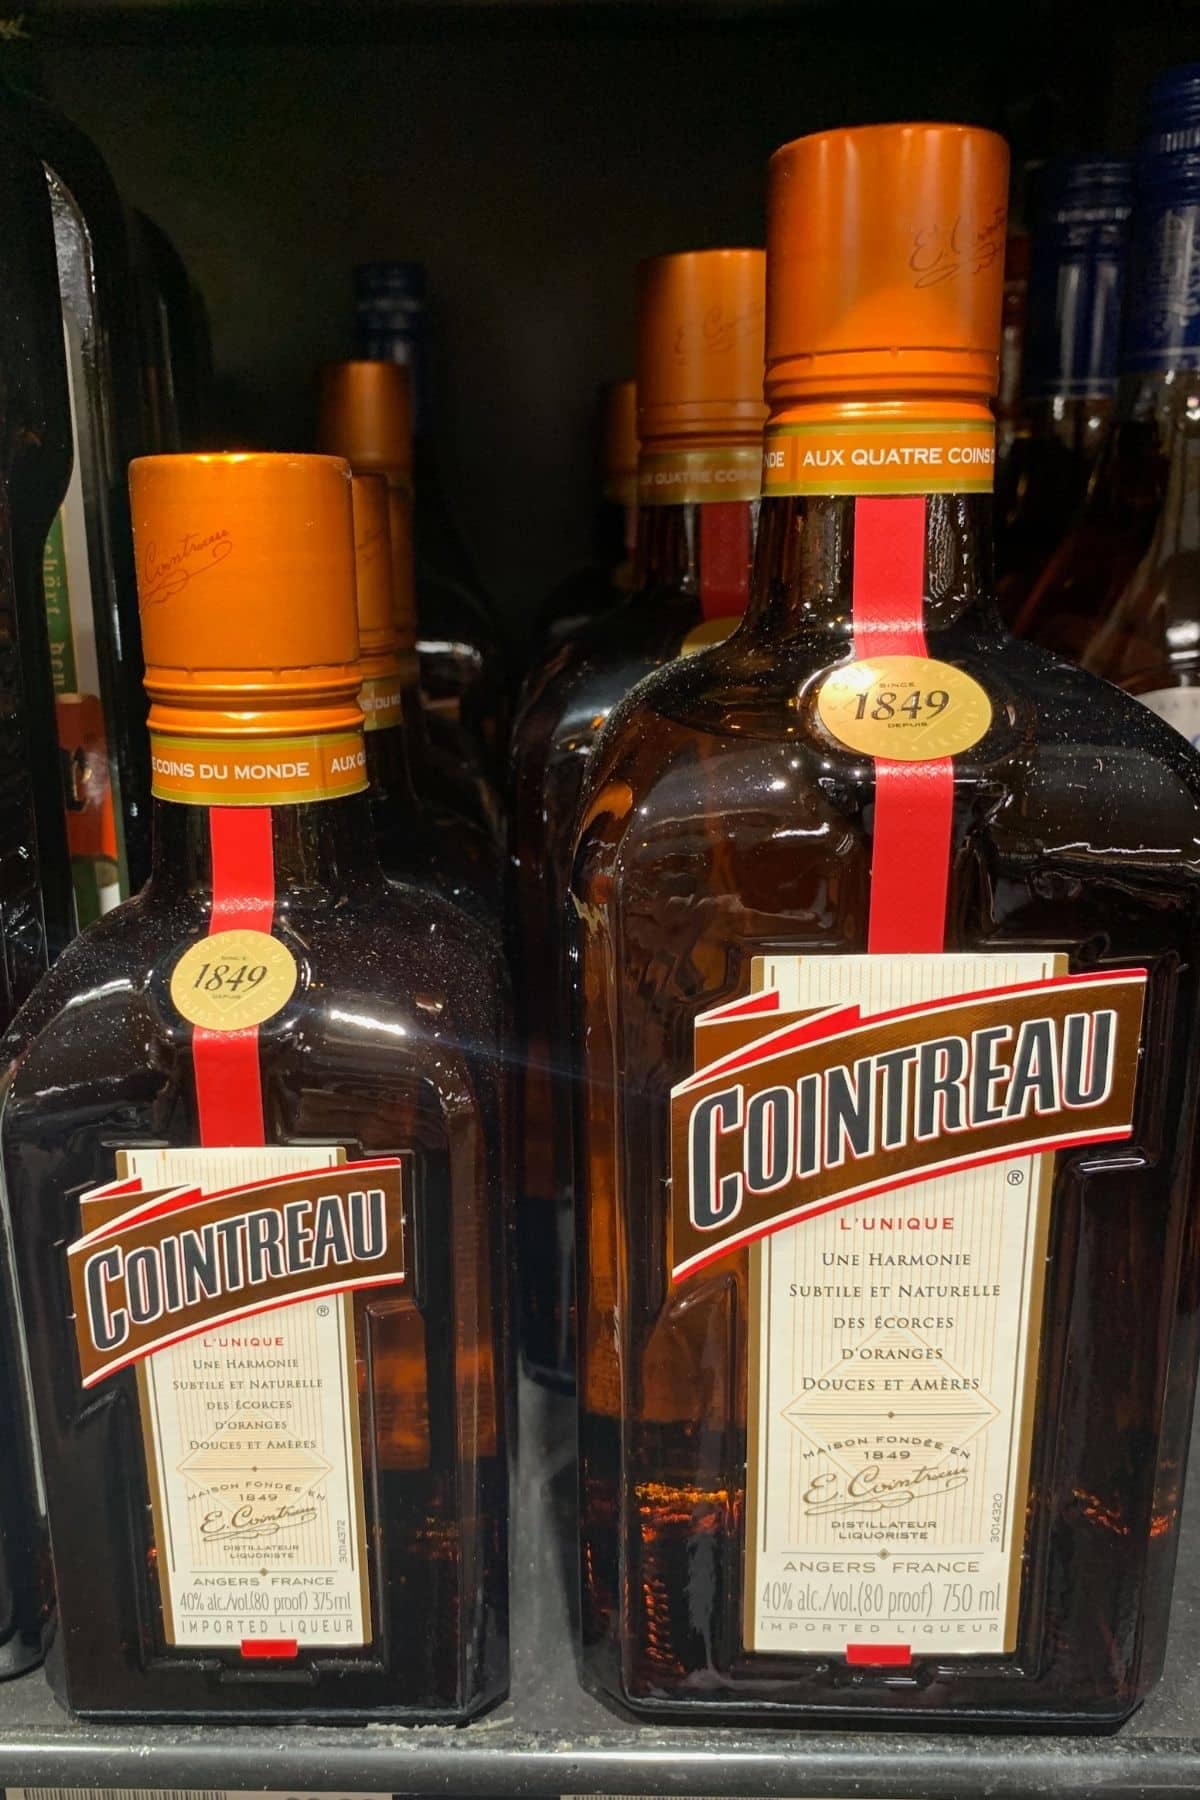 Several bottles of cointreau on a shelf.